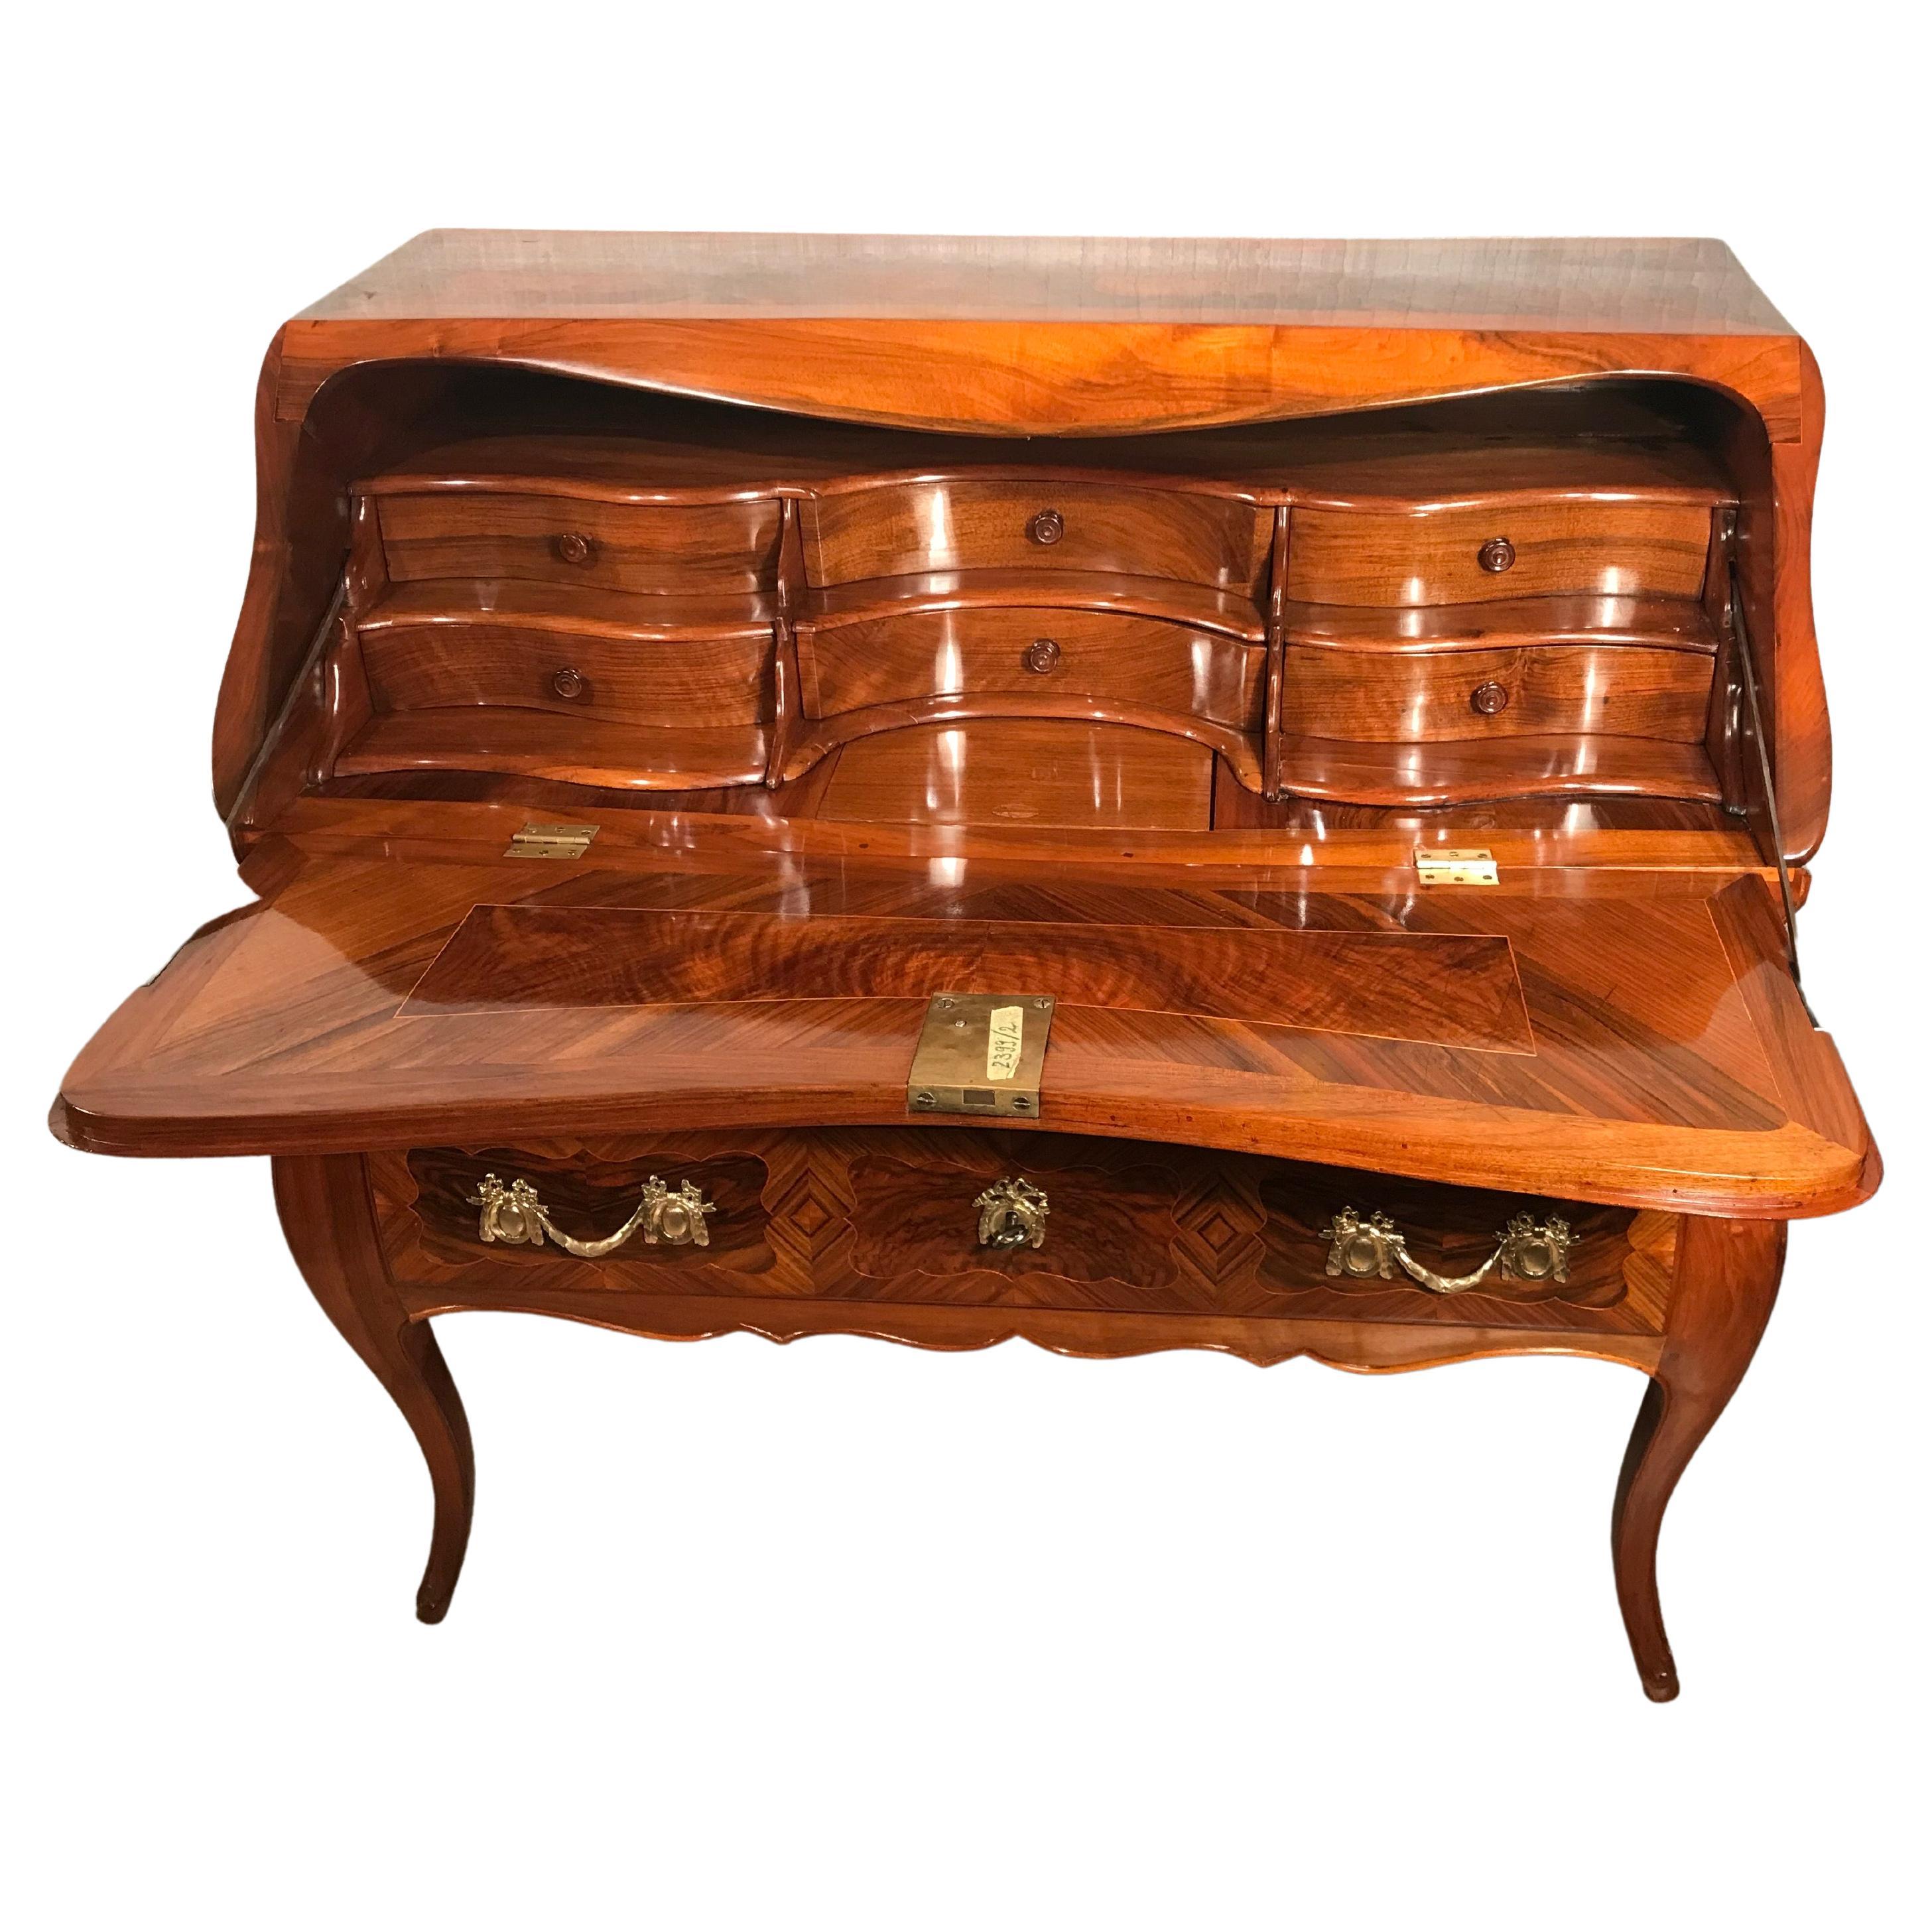 This beautiful Baroque Secretary Desk comes from Southern Germany and dates back to 1760/70. The secretaure has a gorgeous walnut veneer grain. The upper part has a sloping writing flap, the outside has a walnut veneer with curved ribbon inlays. The